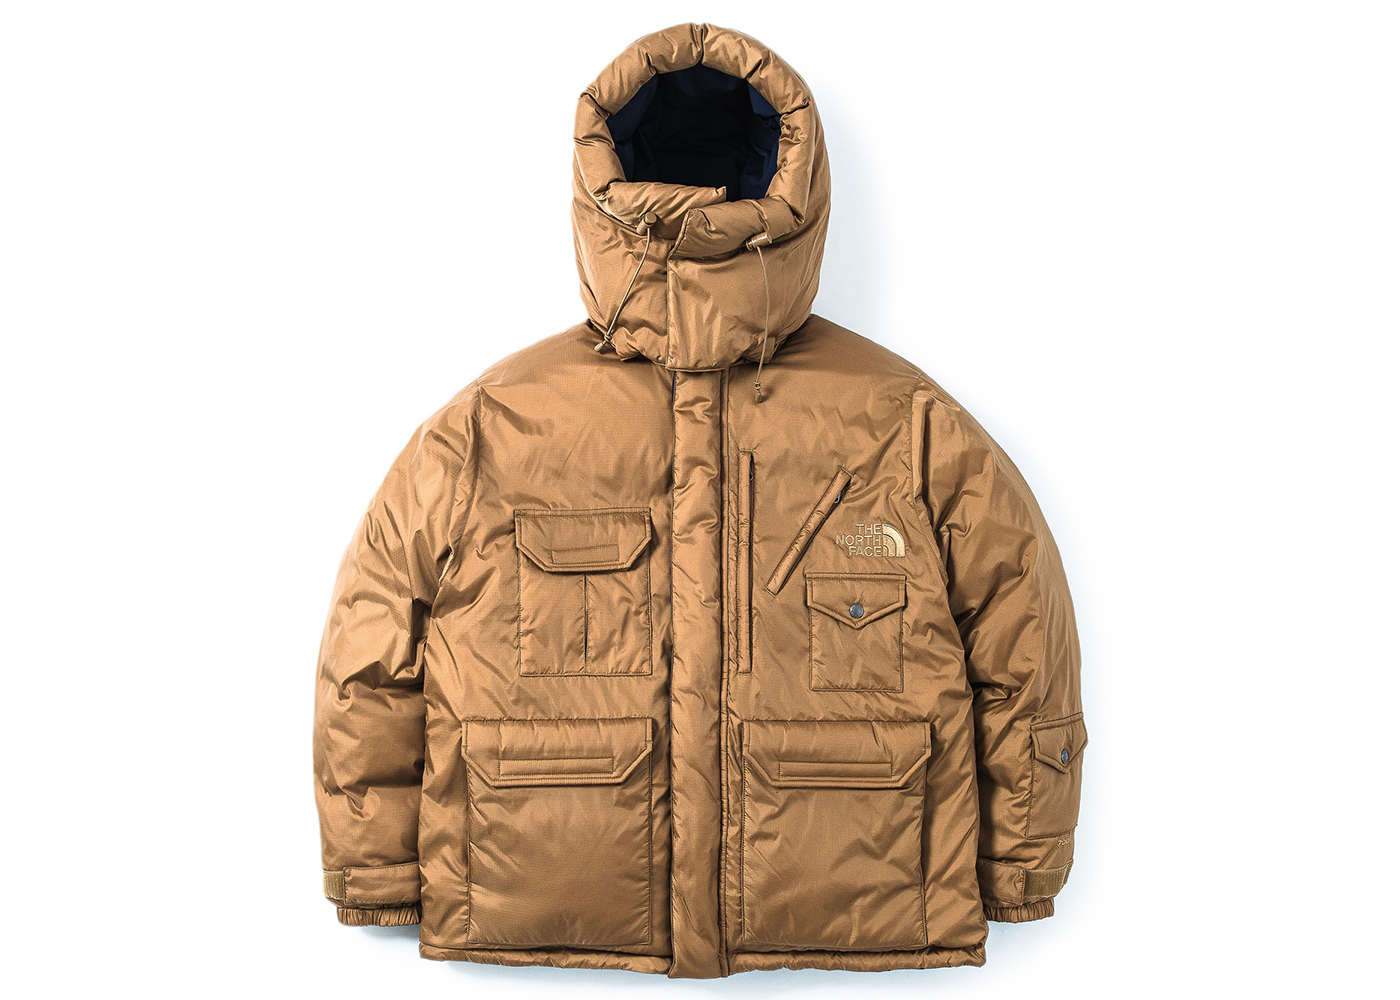 The North Face x Invincible Reversible Nuptse Jacket Utility Brown